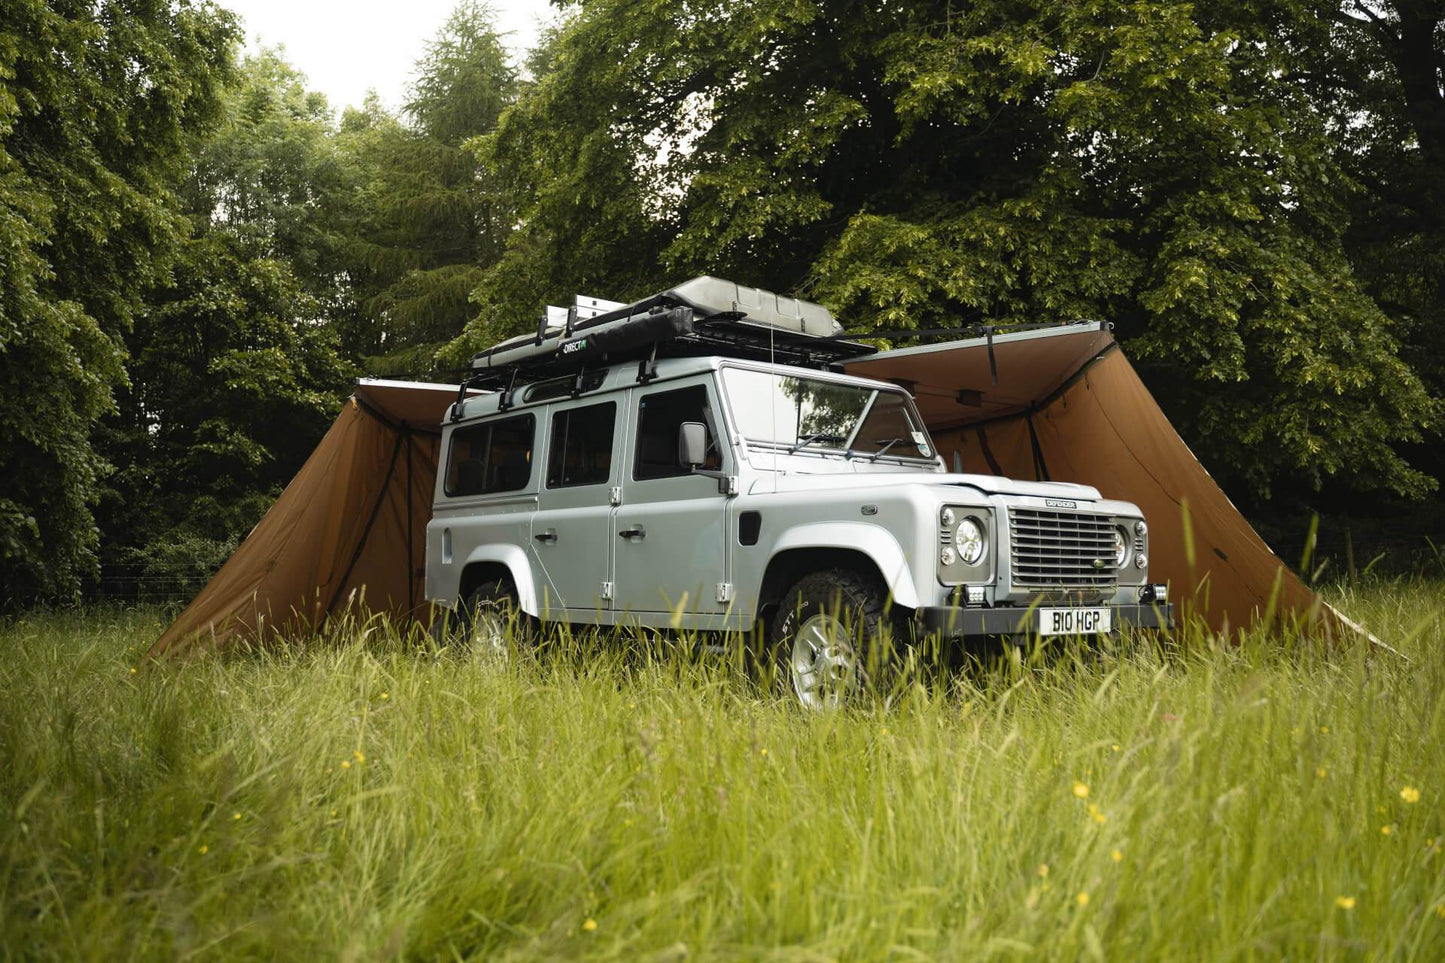 Forest Green Side Walls for Direct4x4 270 Degree Overland Expedition Awning -  - sold by Direct4x4